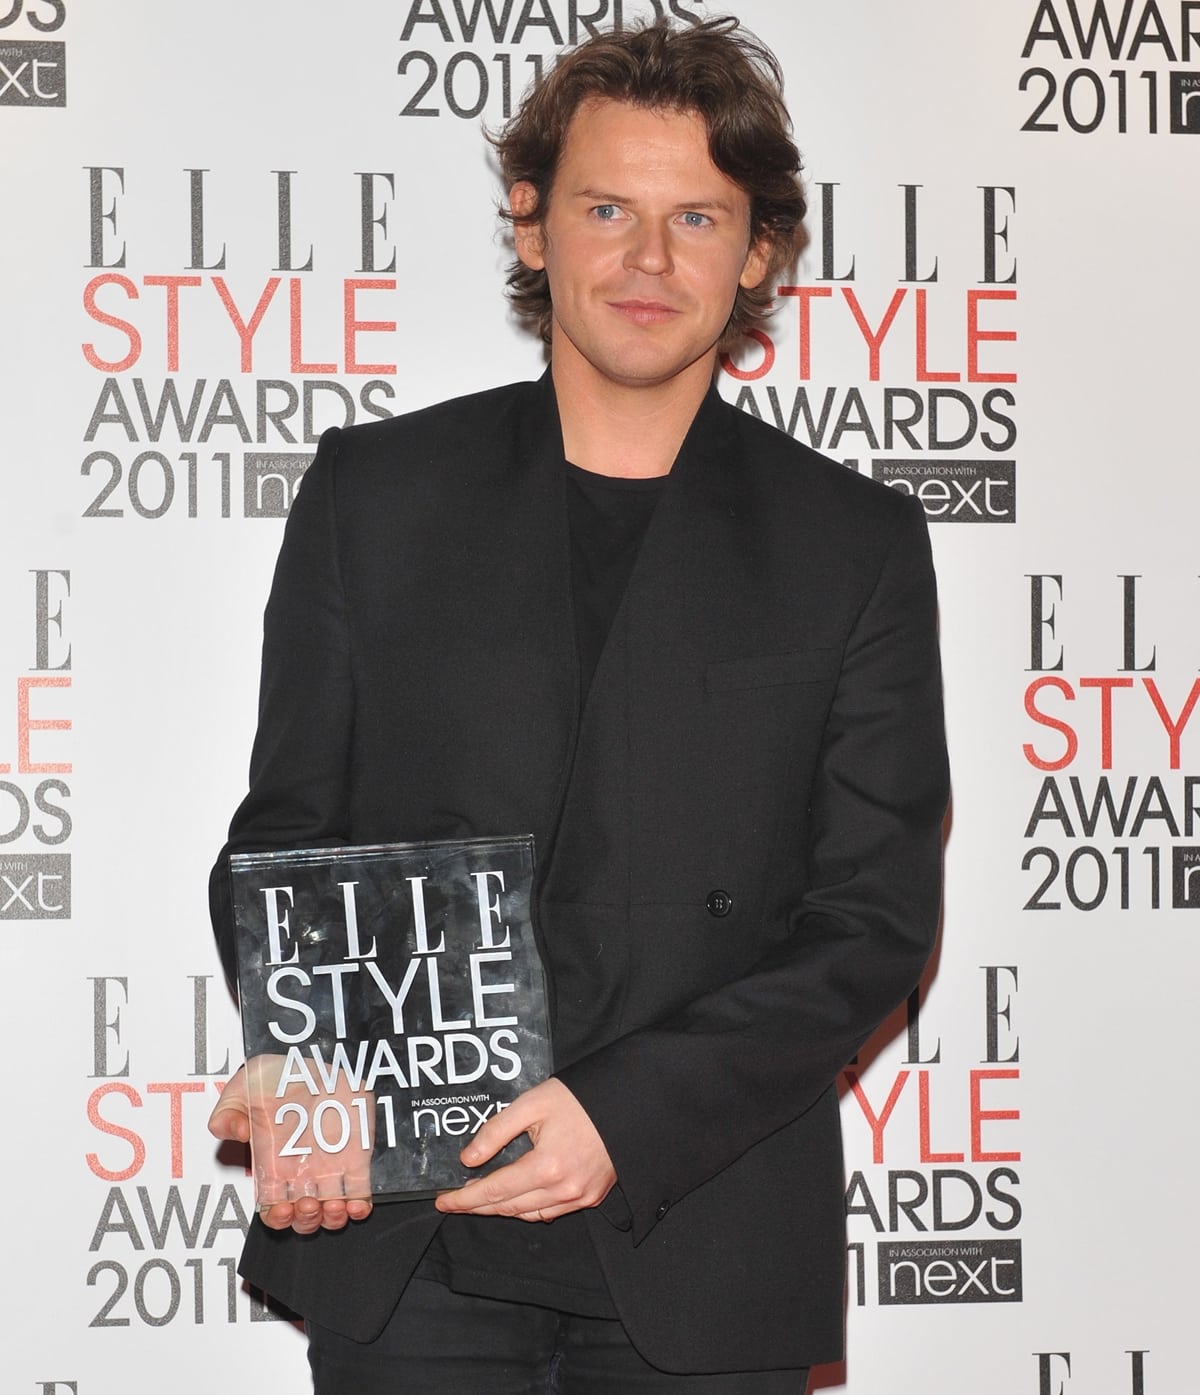 Christopher Kane poses with the award for British Designer during the ELLE Style Awards 2011